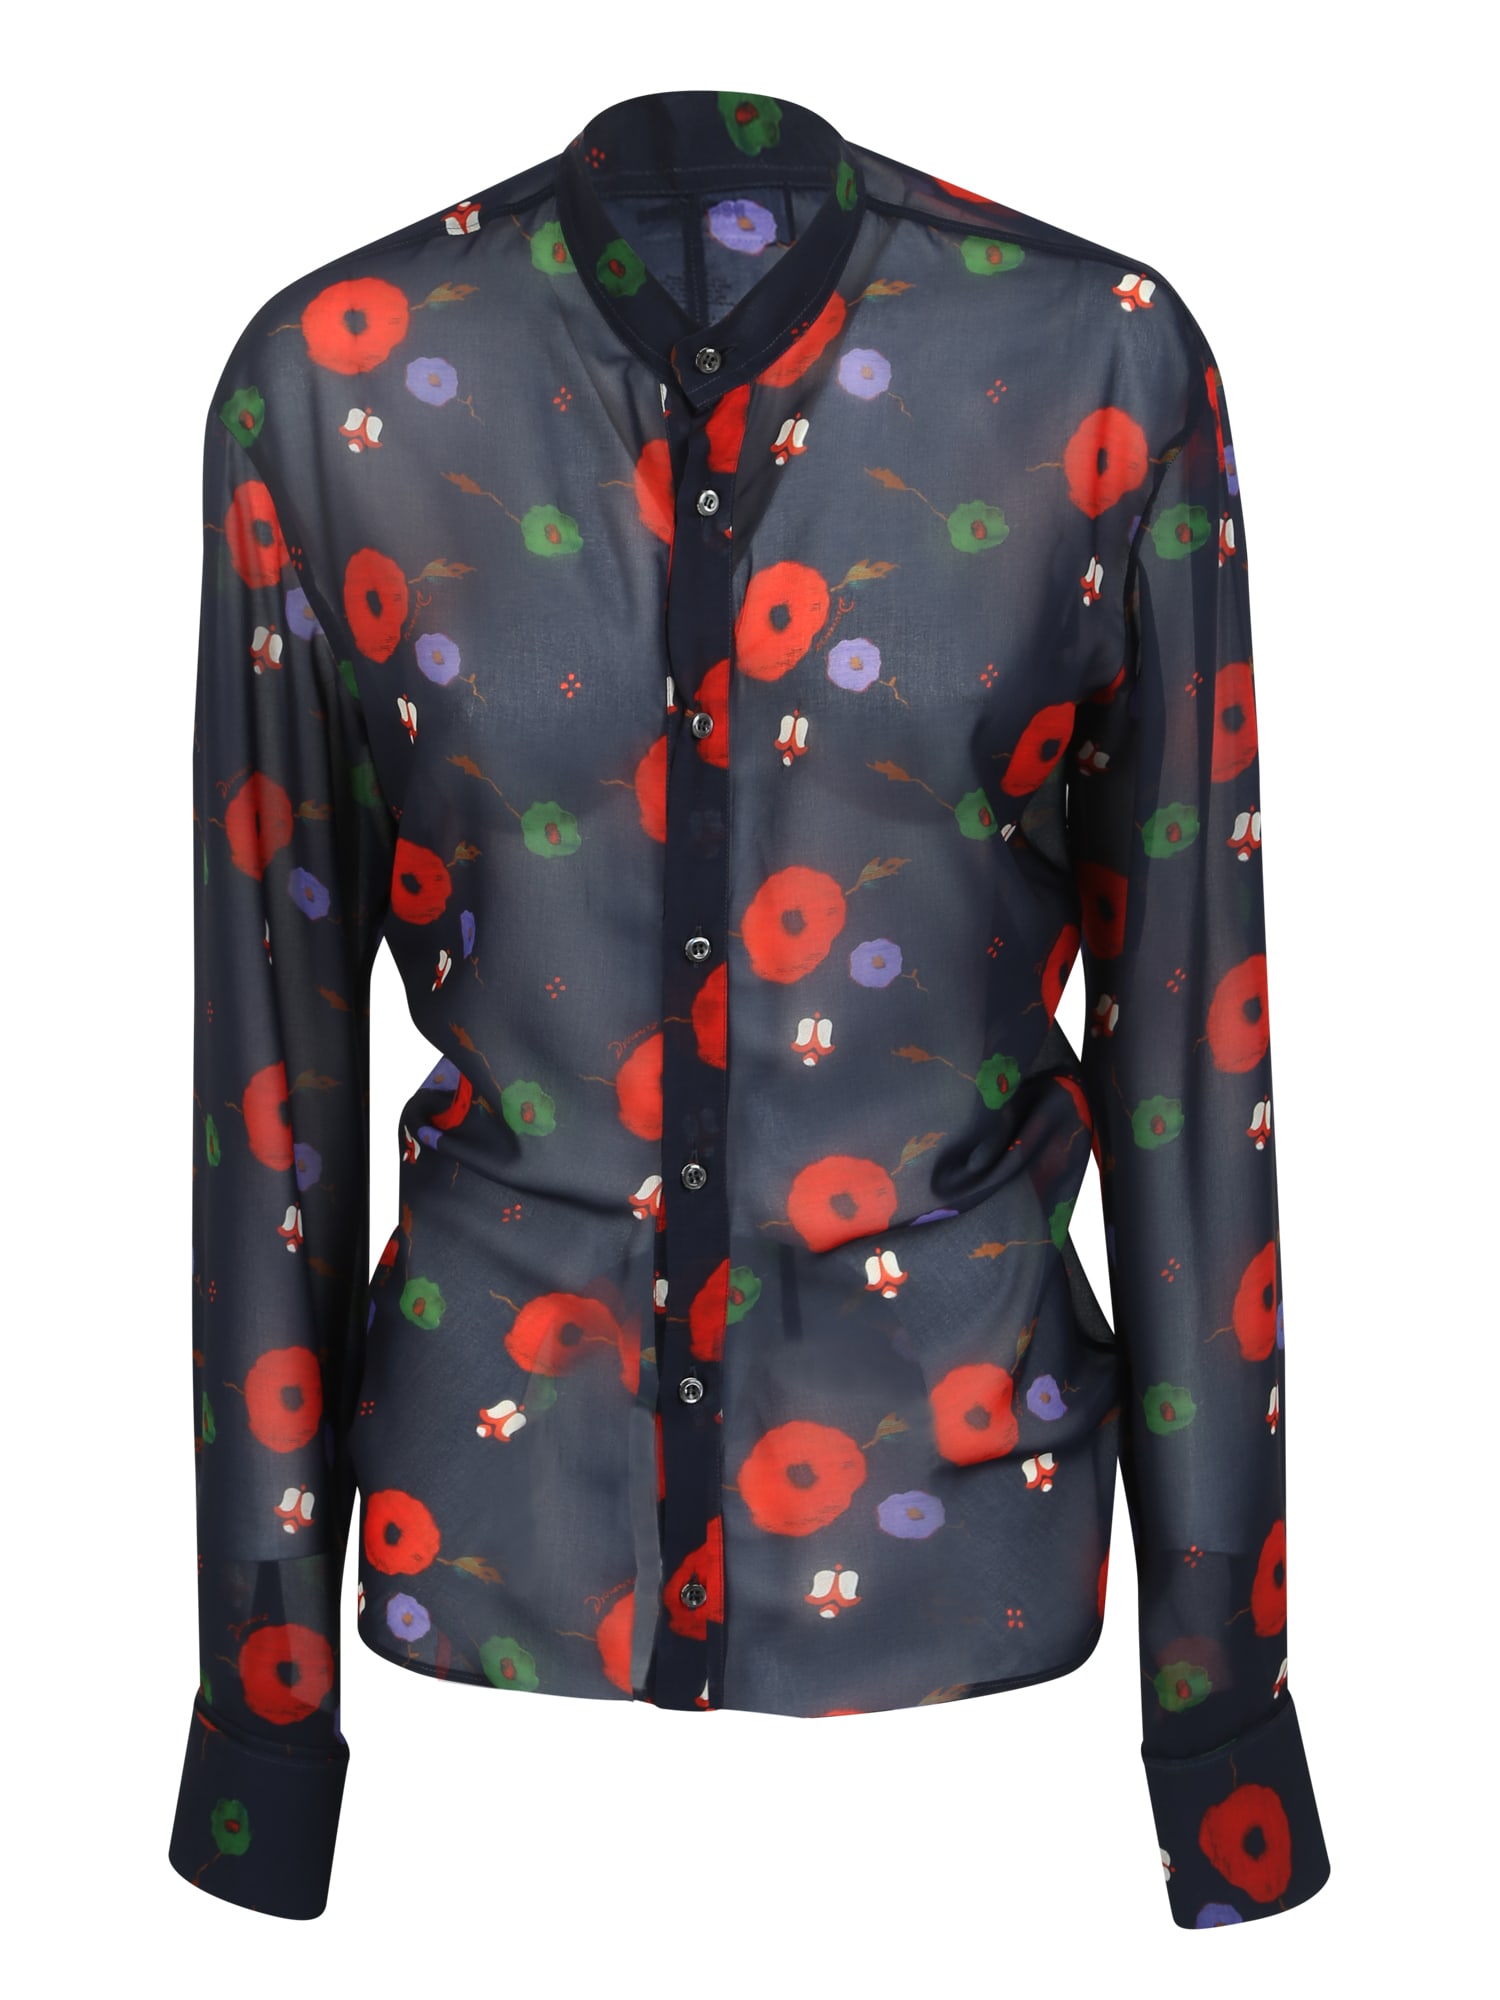 Semi-transparent Shirt By Dsquared2; Gives A Touch Of Class But At The Same Time Casual For The All-over Floral Prints